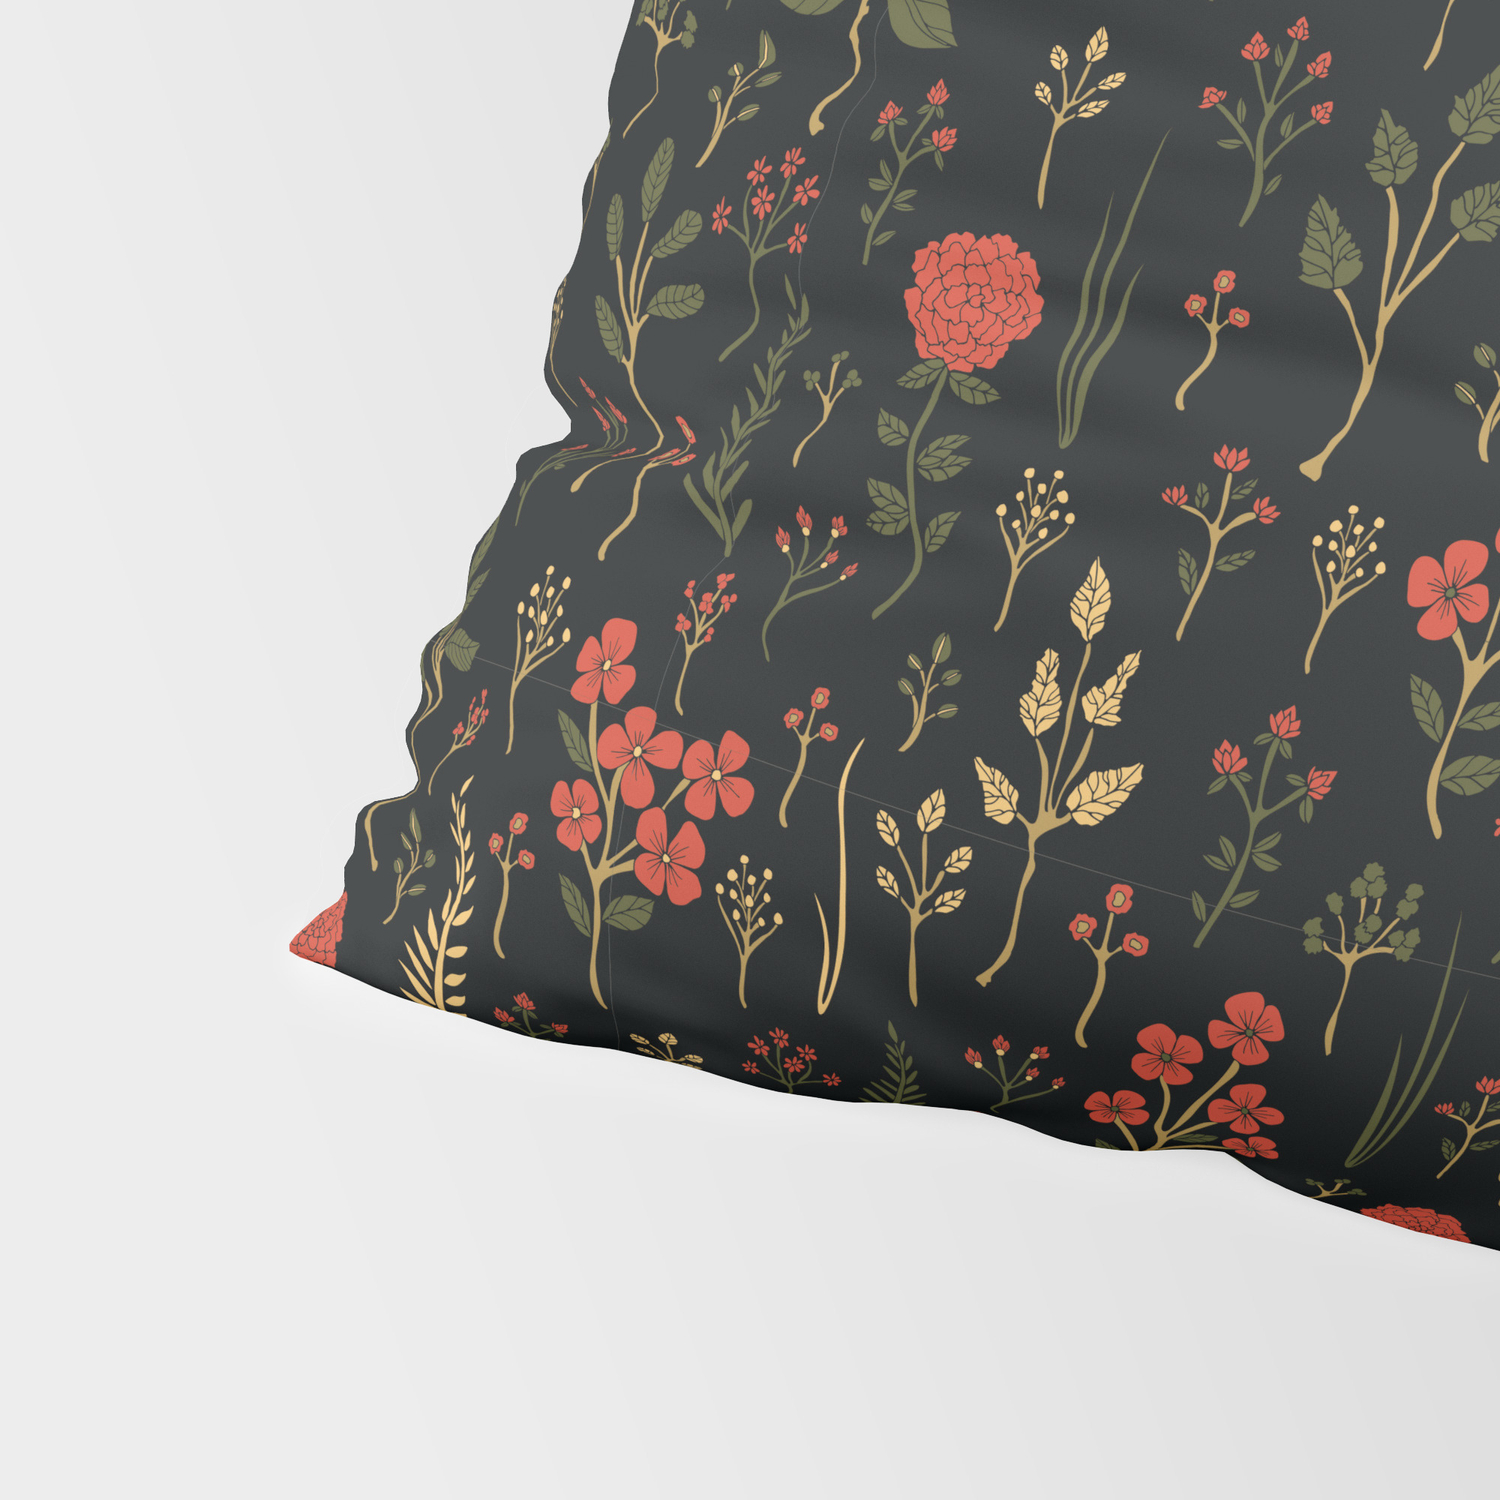 Red-Orange and Black Floral/Botanical Print by Beth Norton on Throw Pillow Society6 Green 